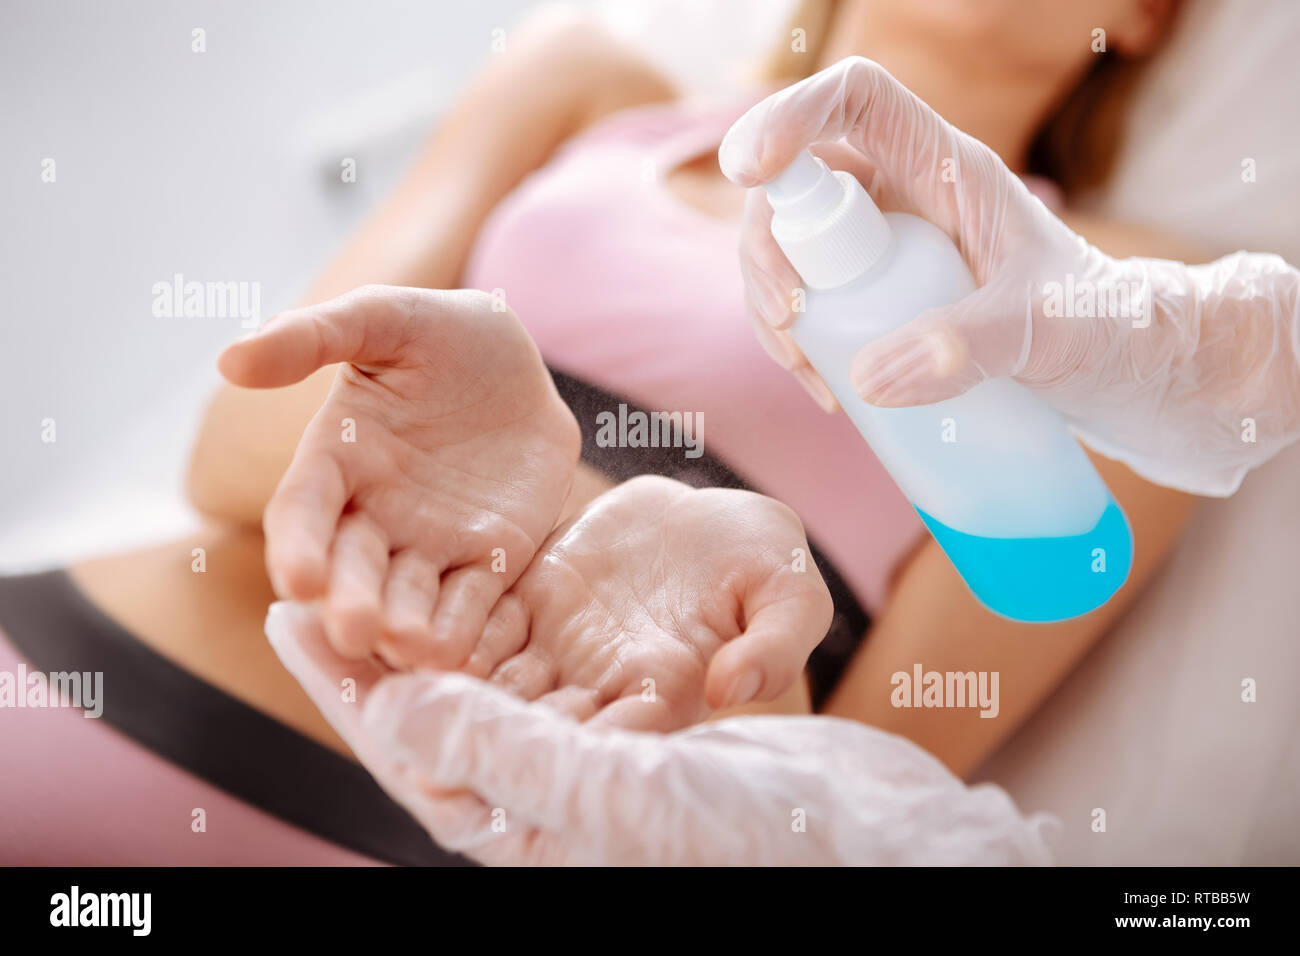 Young woman having hands disinfected before depilation Stock Photo